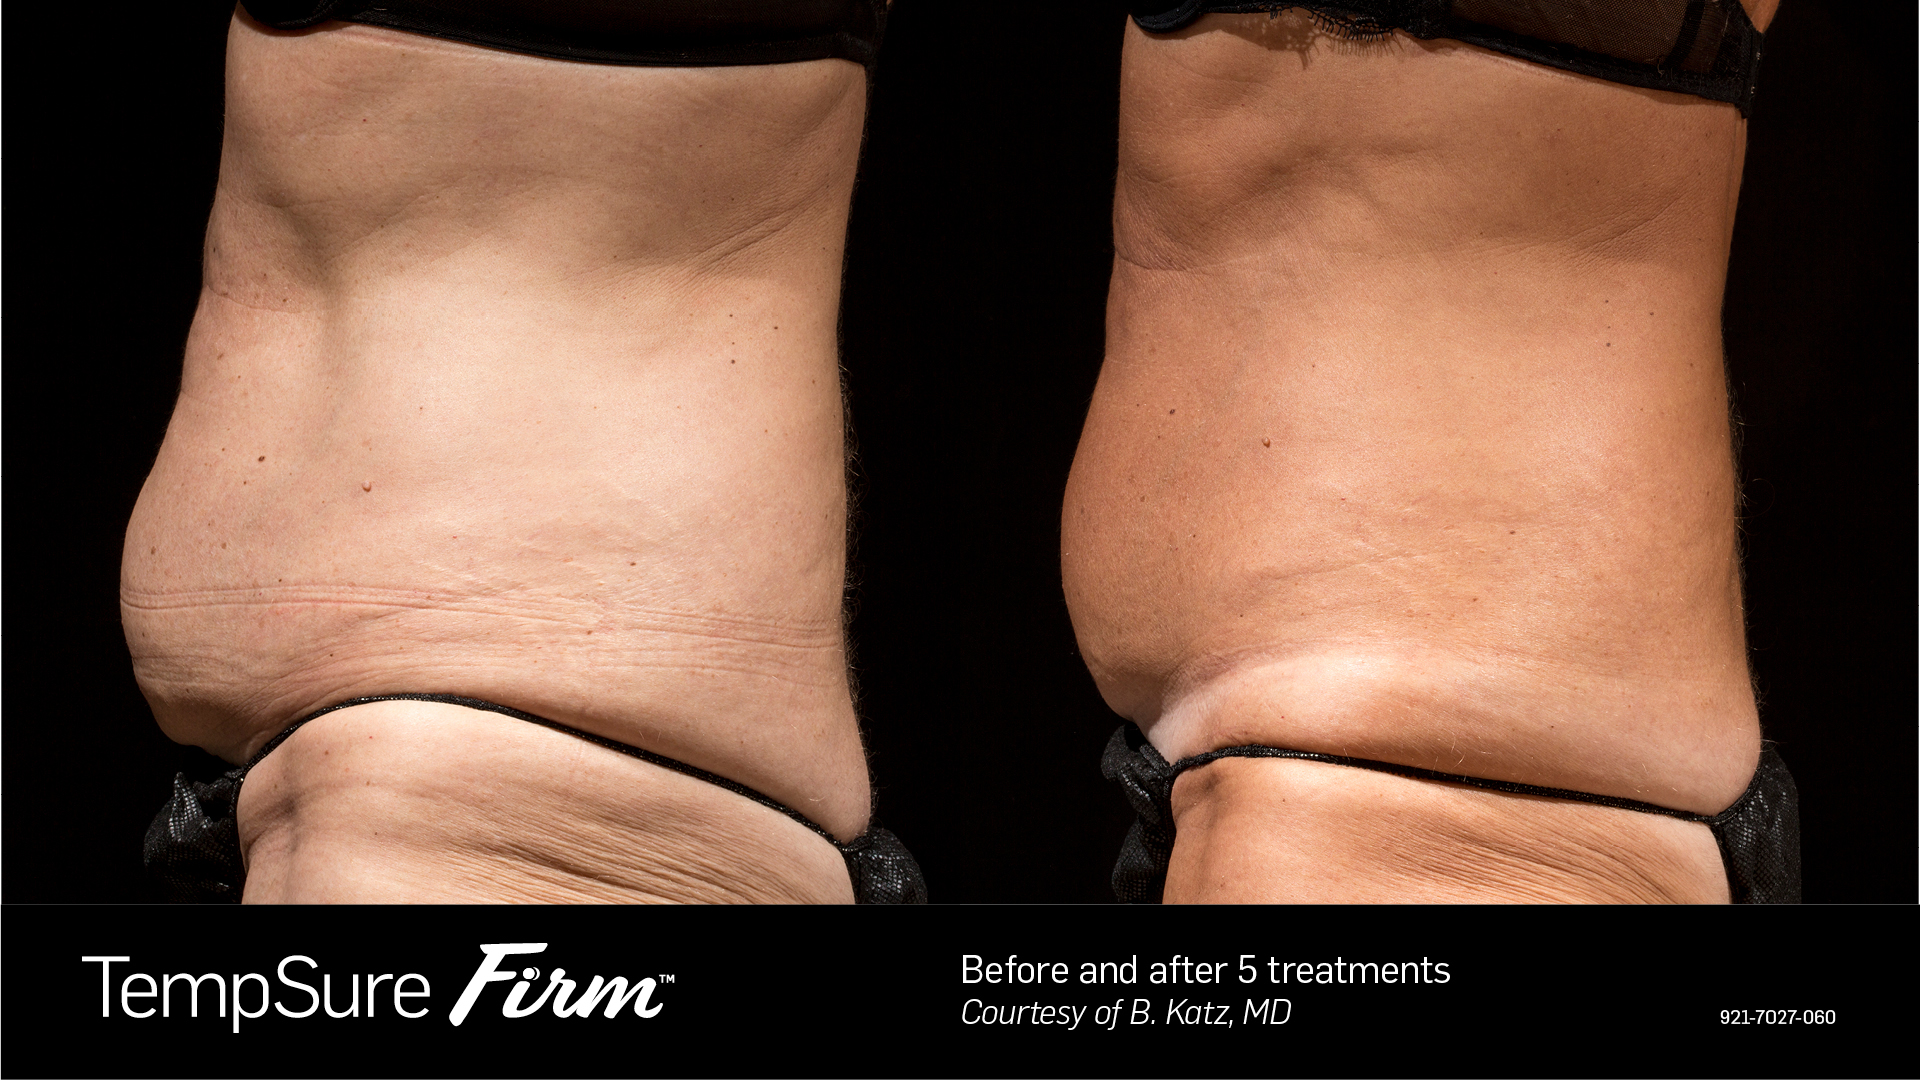 Before and after TempSure Firm results